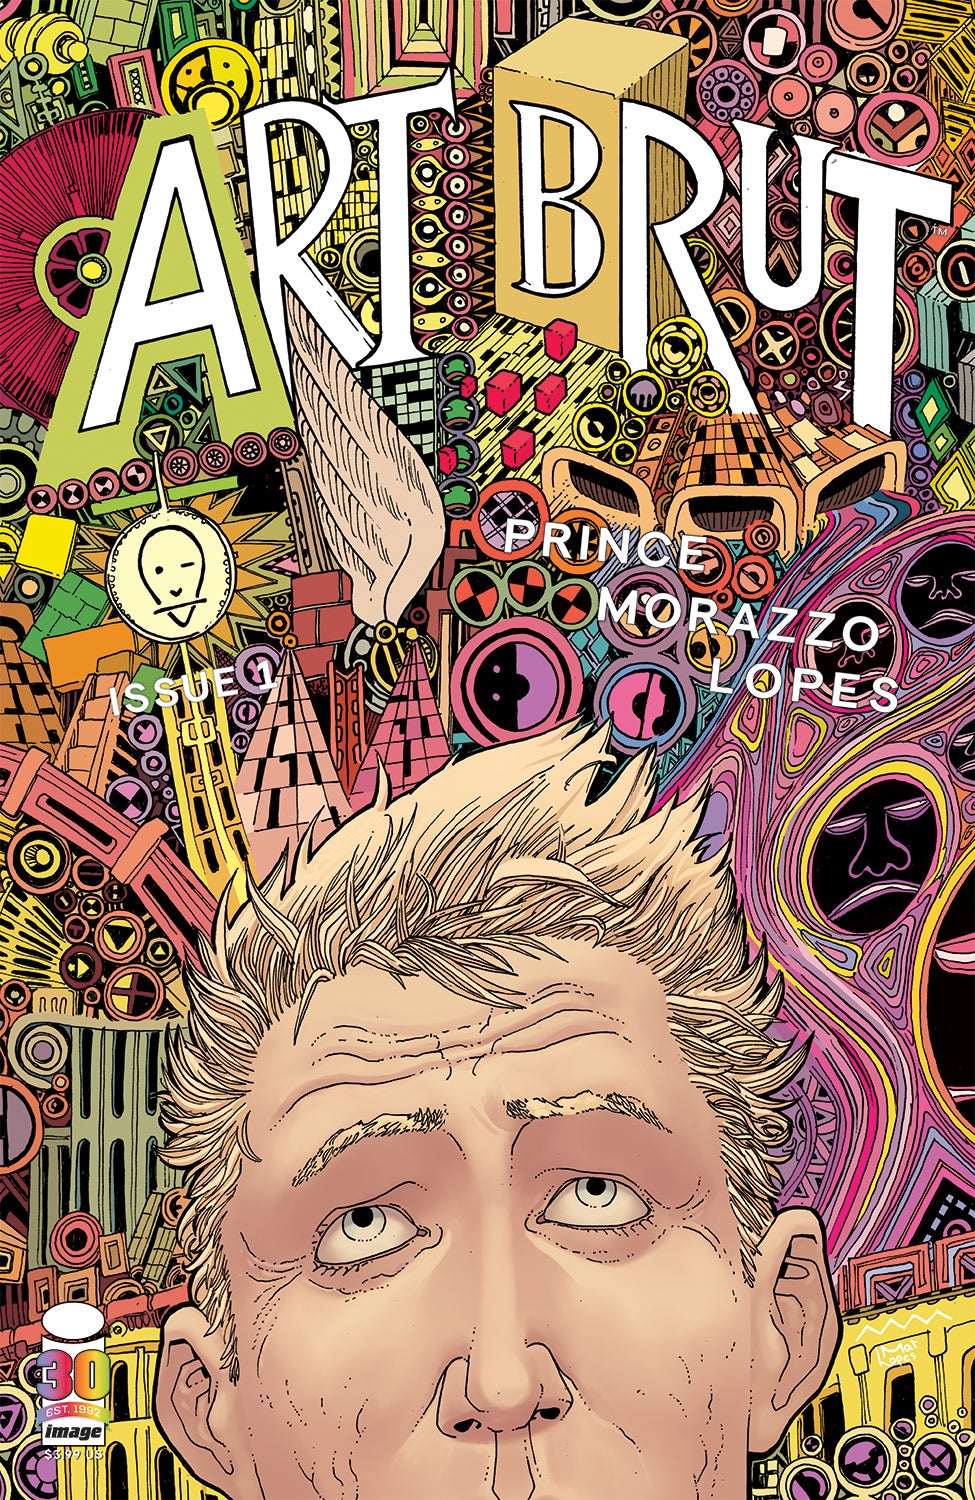 Art Brut by W. Maxwell Prince and Martín Morazzo